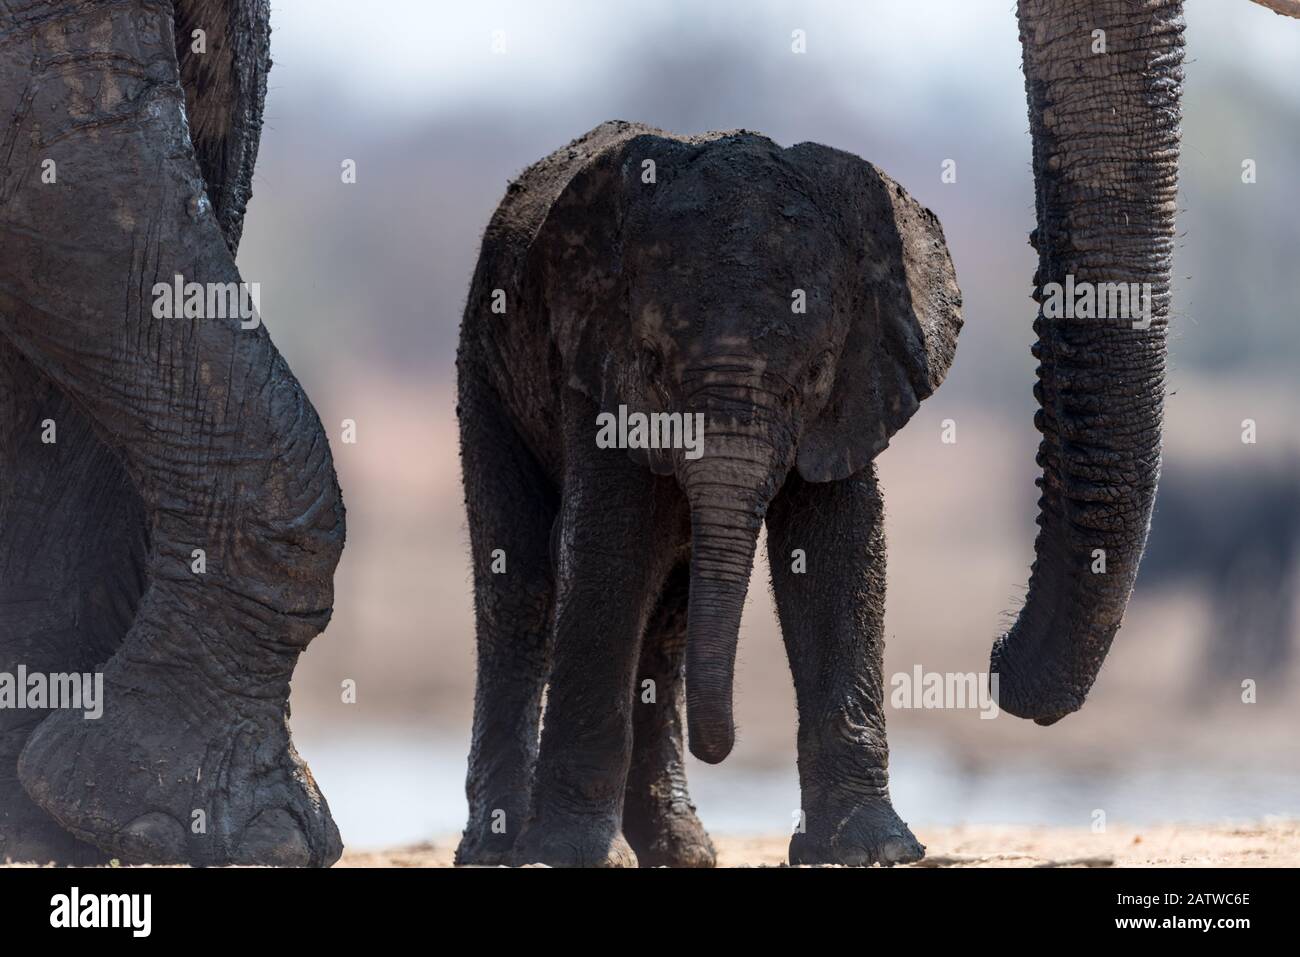 Elephant calf, baby elephant in the African wilderness Stock Photo